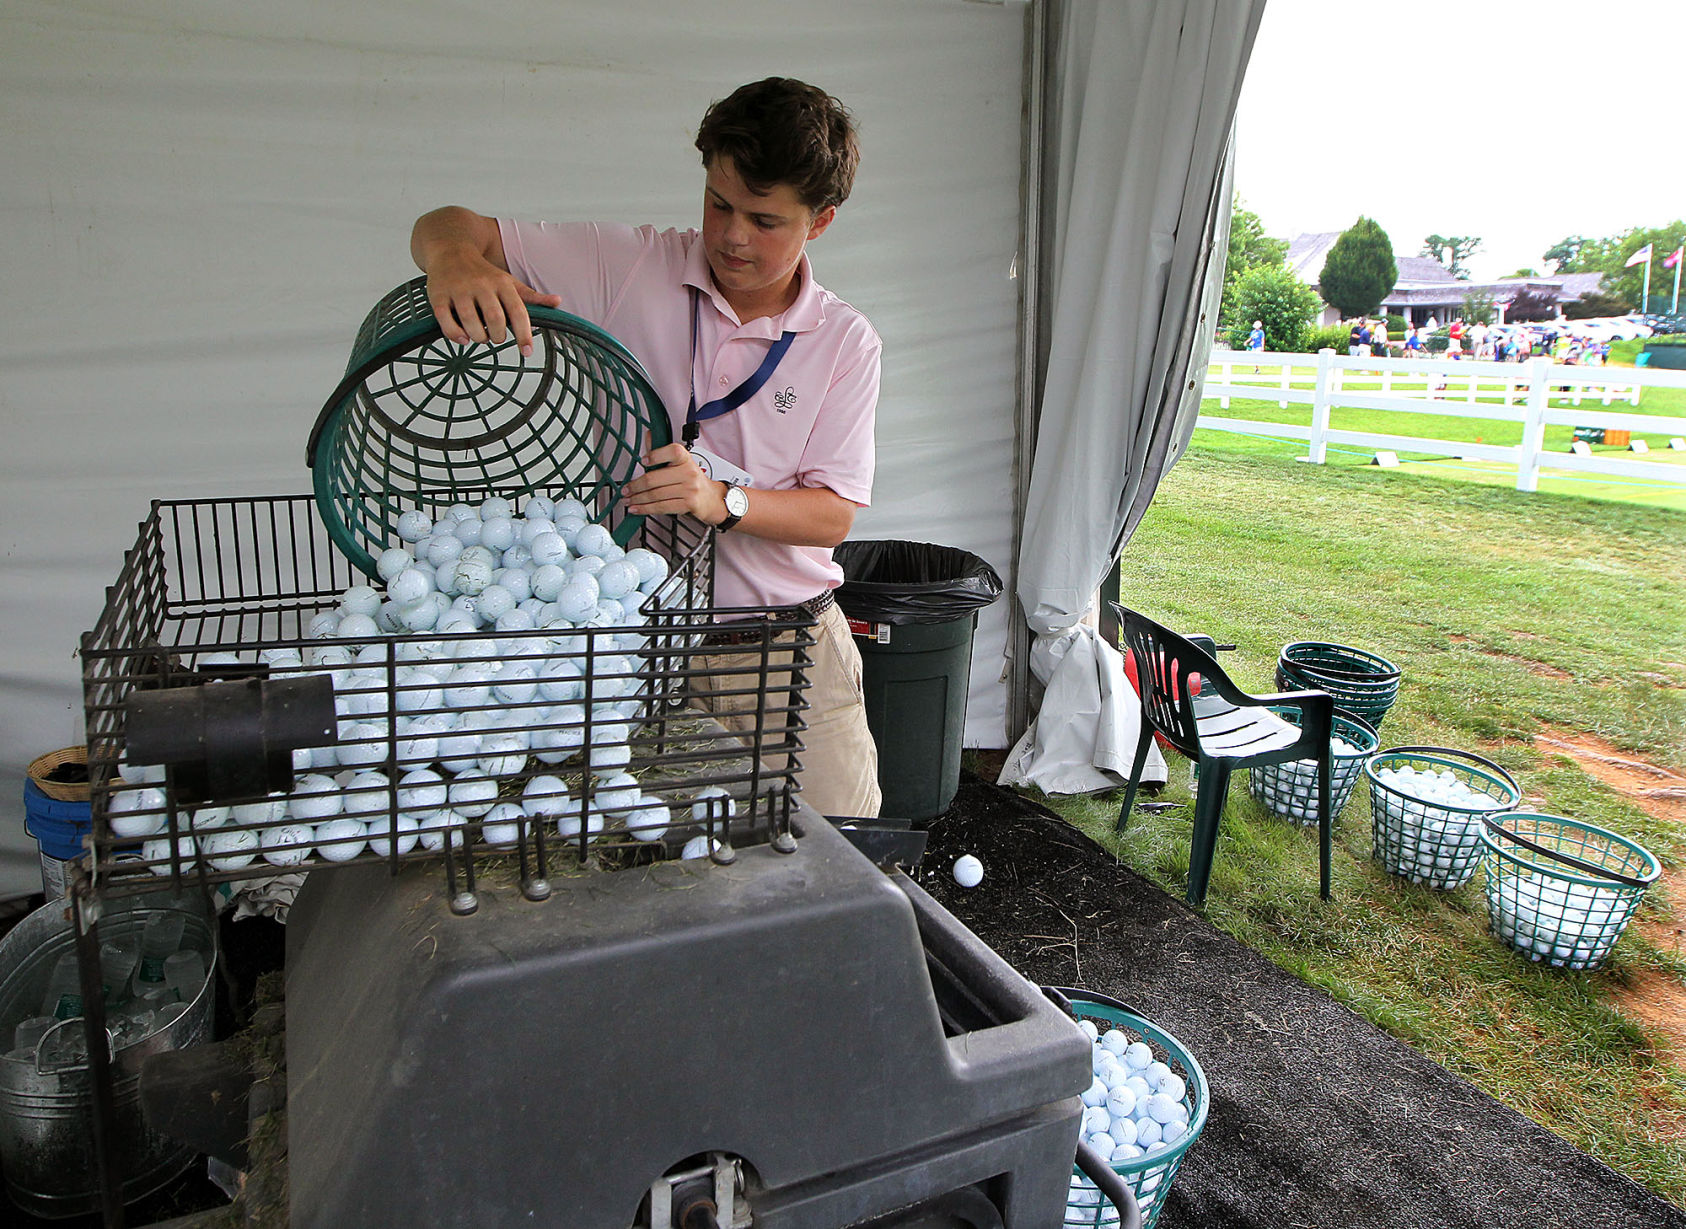 US Womens Open Less than a year out, volunteer opportunities filling up fast Pro Golf lancasteronline picture